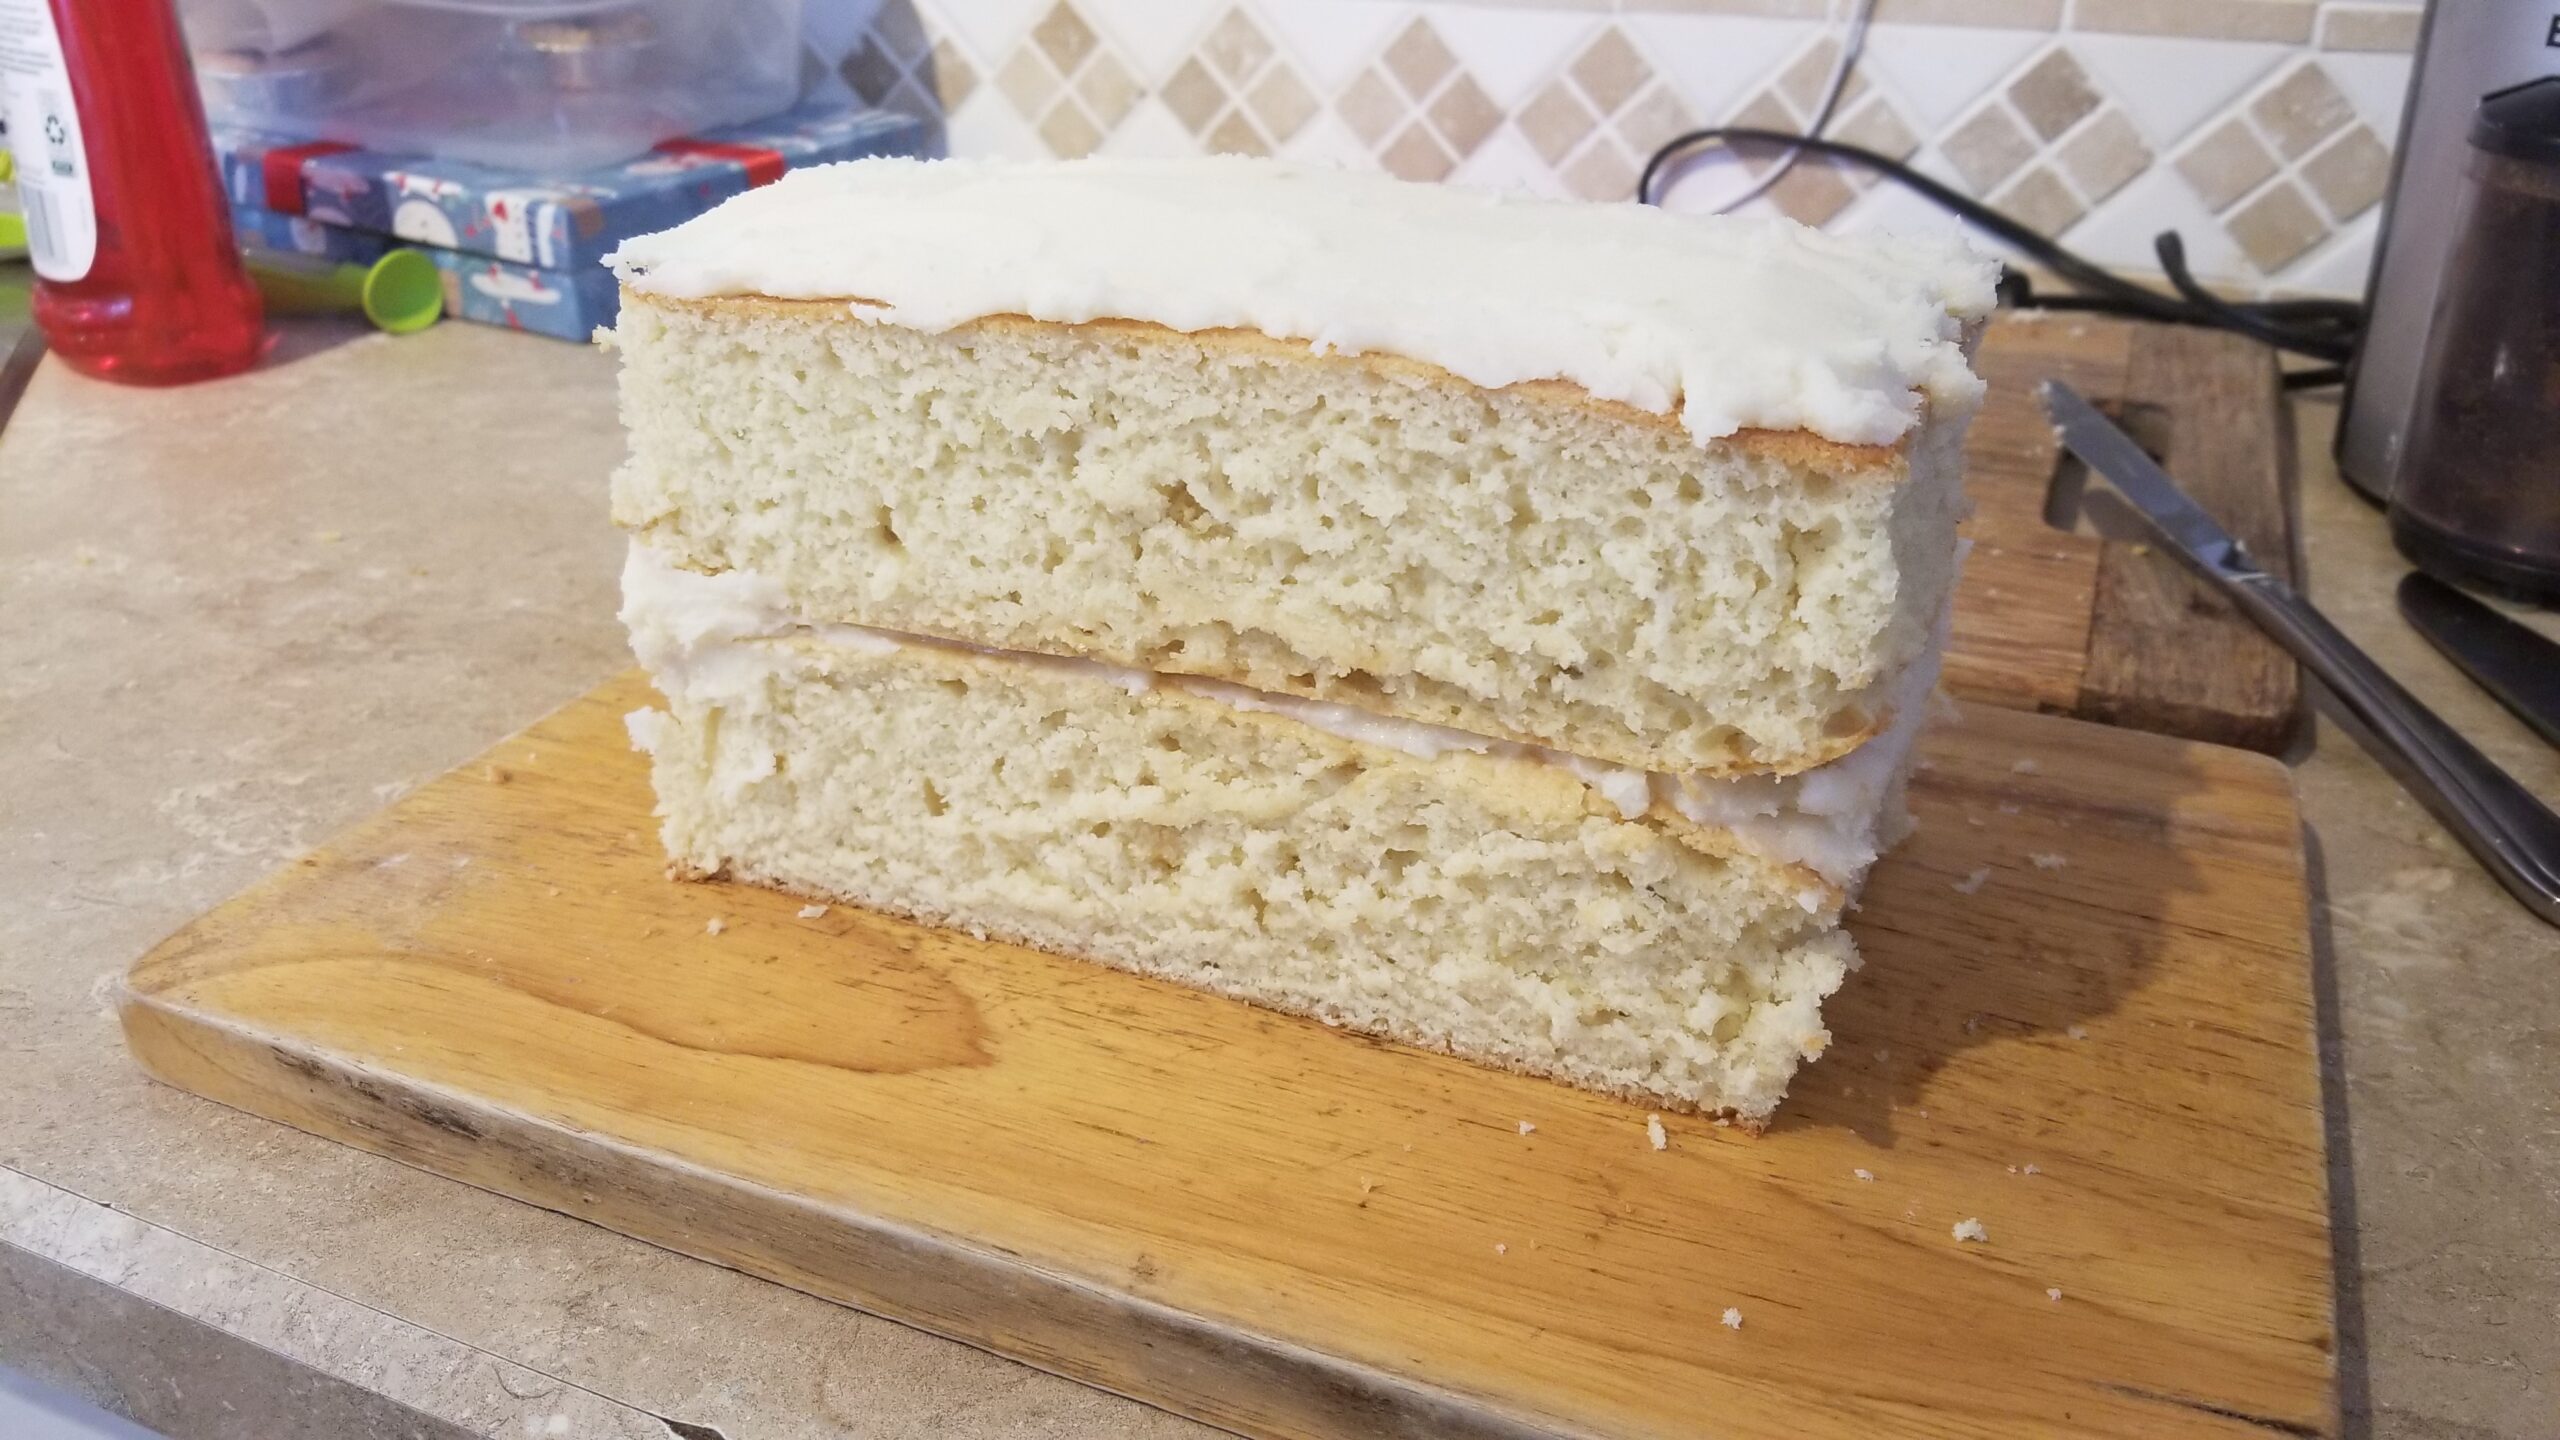 A picture of a homemade vanilla layer cake with white buttercream frosting between layers and on top, but not around the sides exposing the layers. The cake is resting on a wooden cutting board sitting on a kitchen counter.